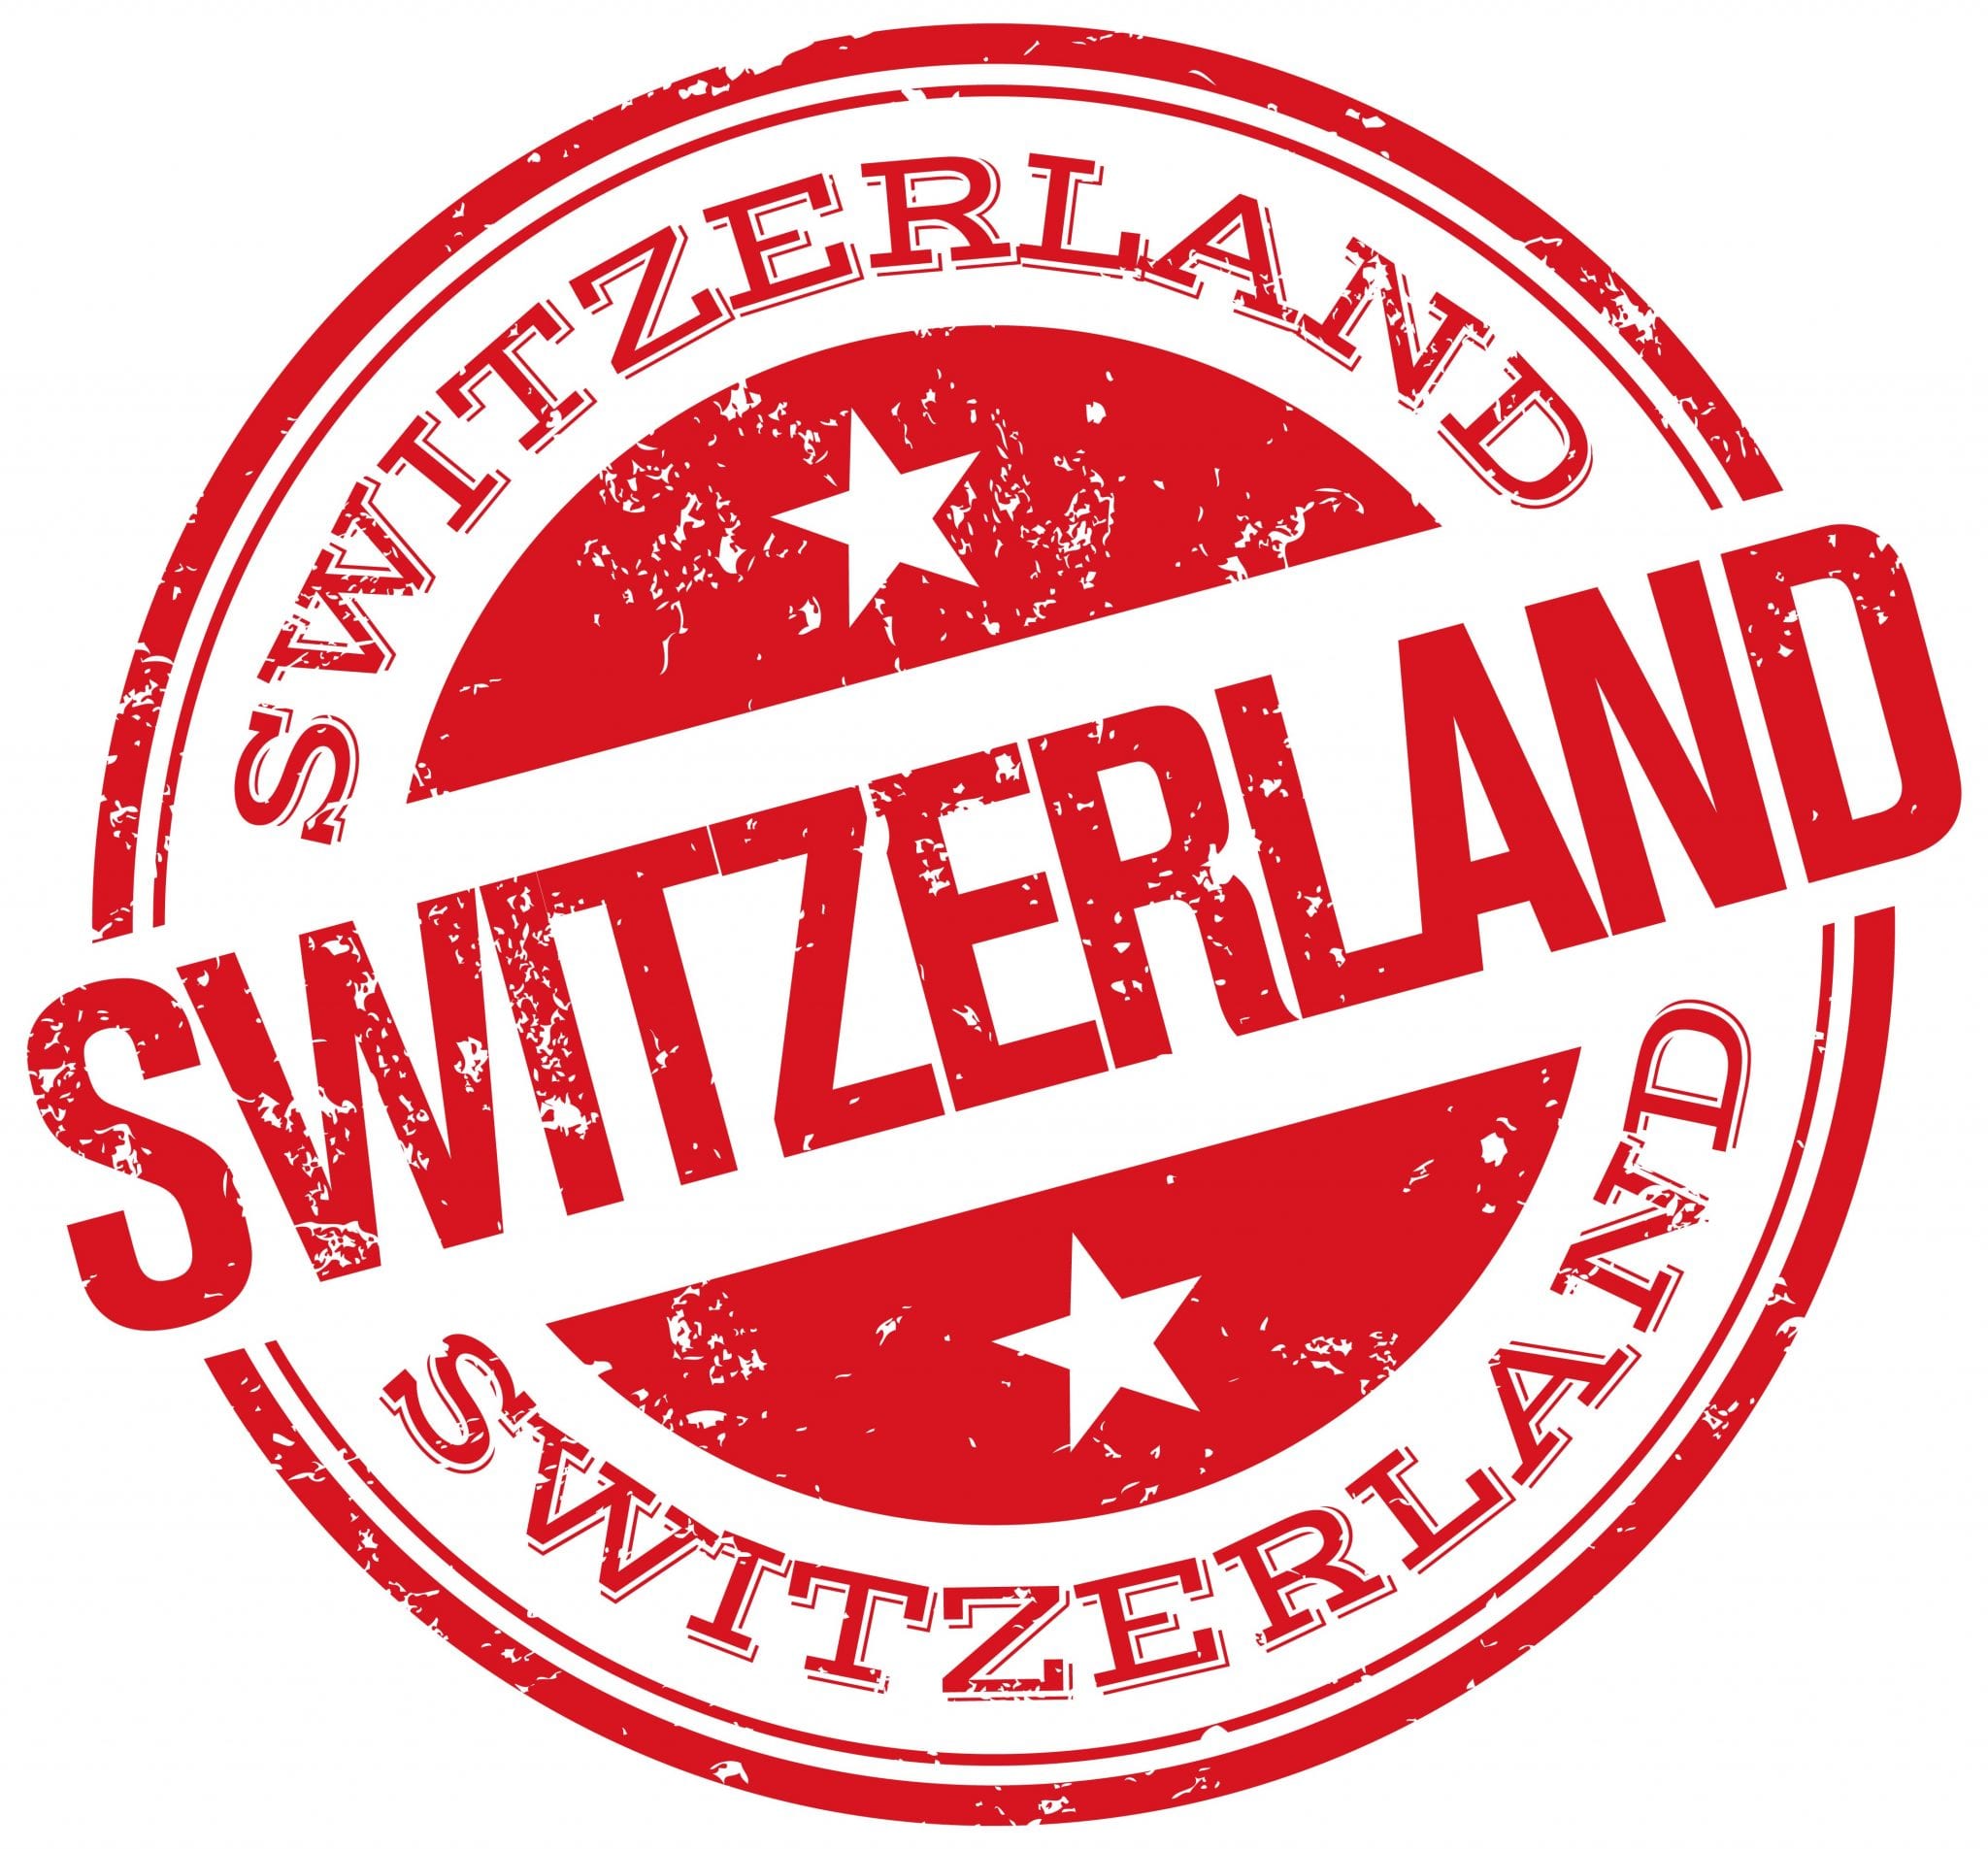 Researching The K12 Education System In Switzerland